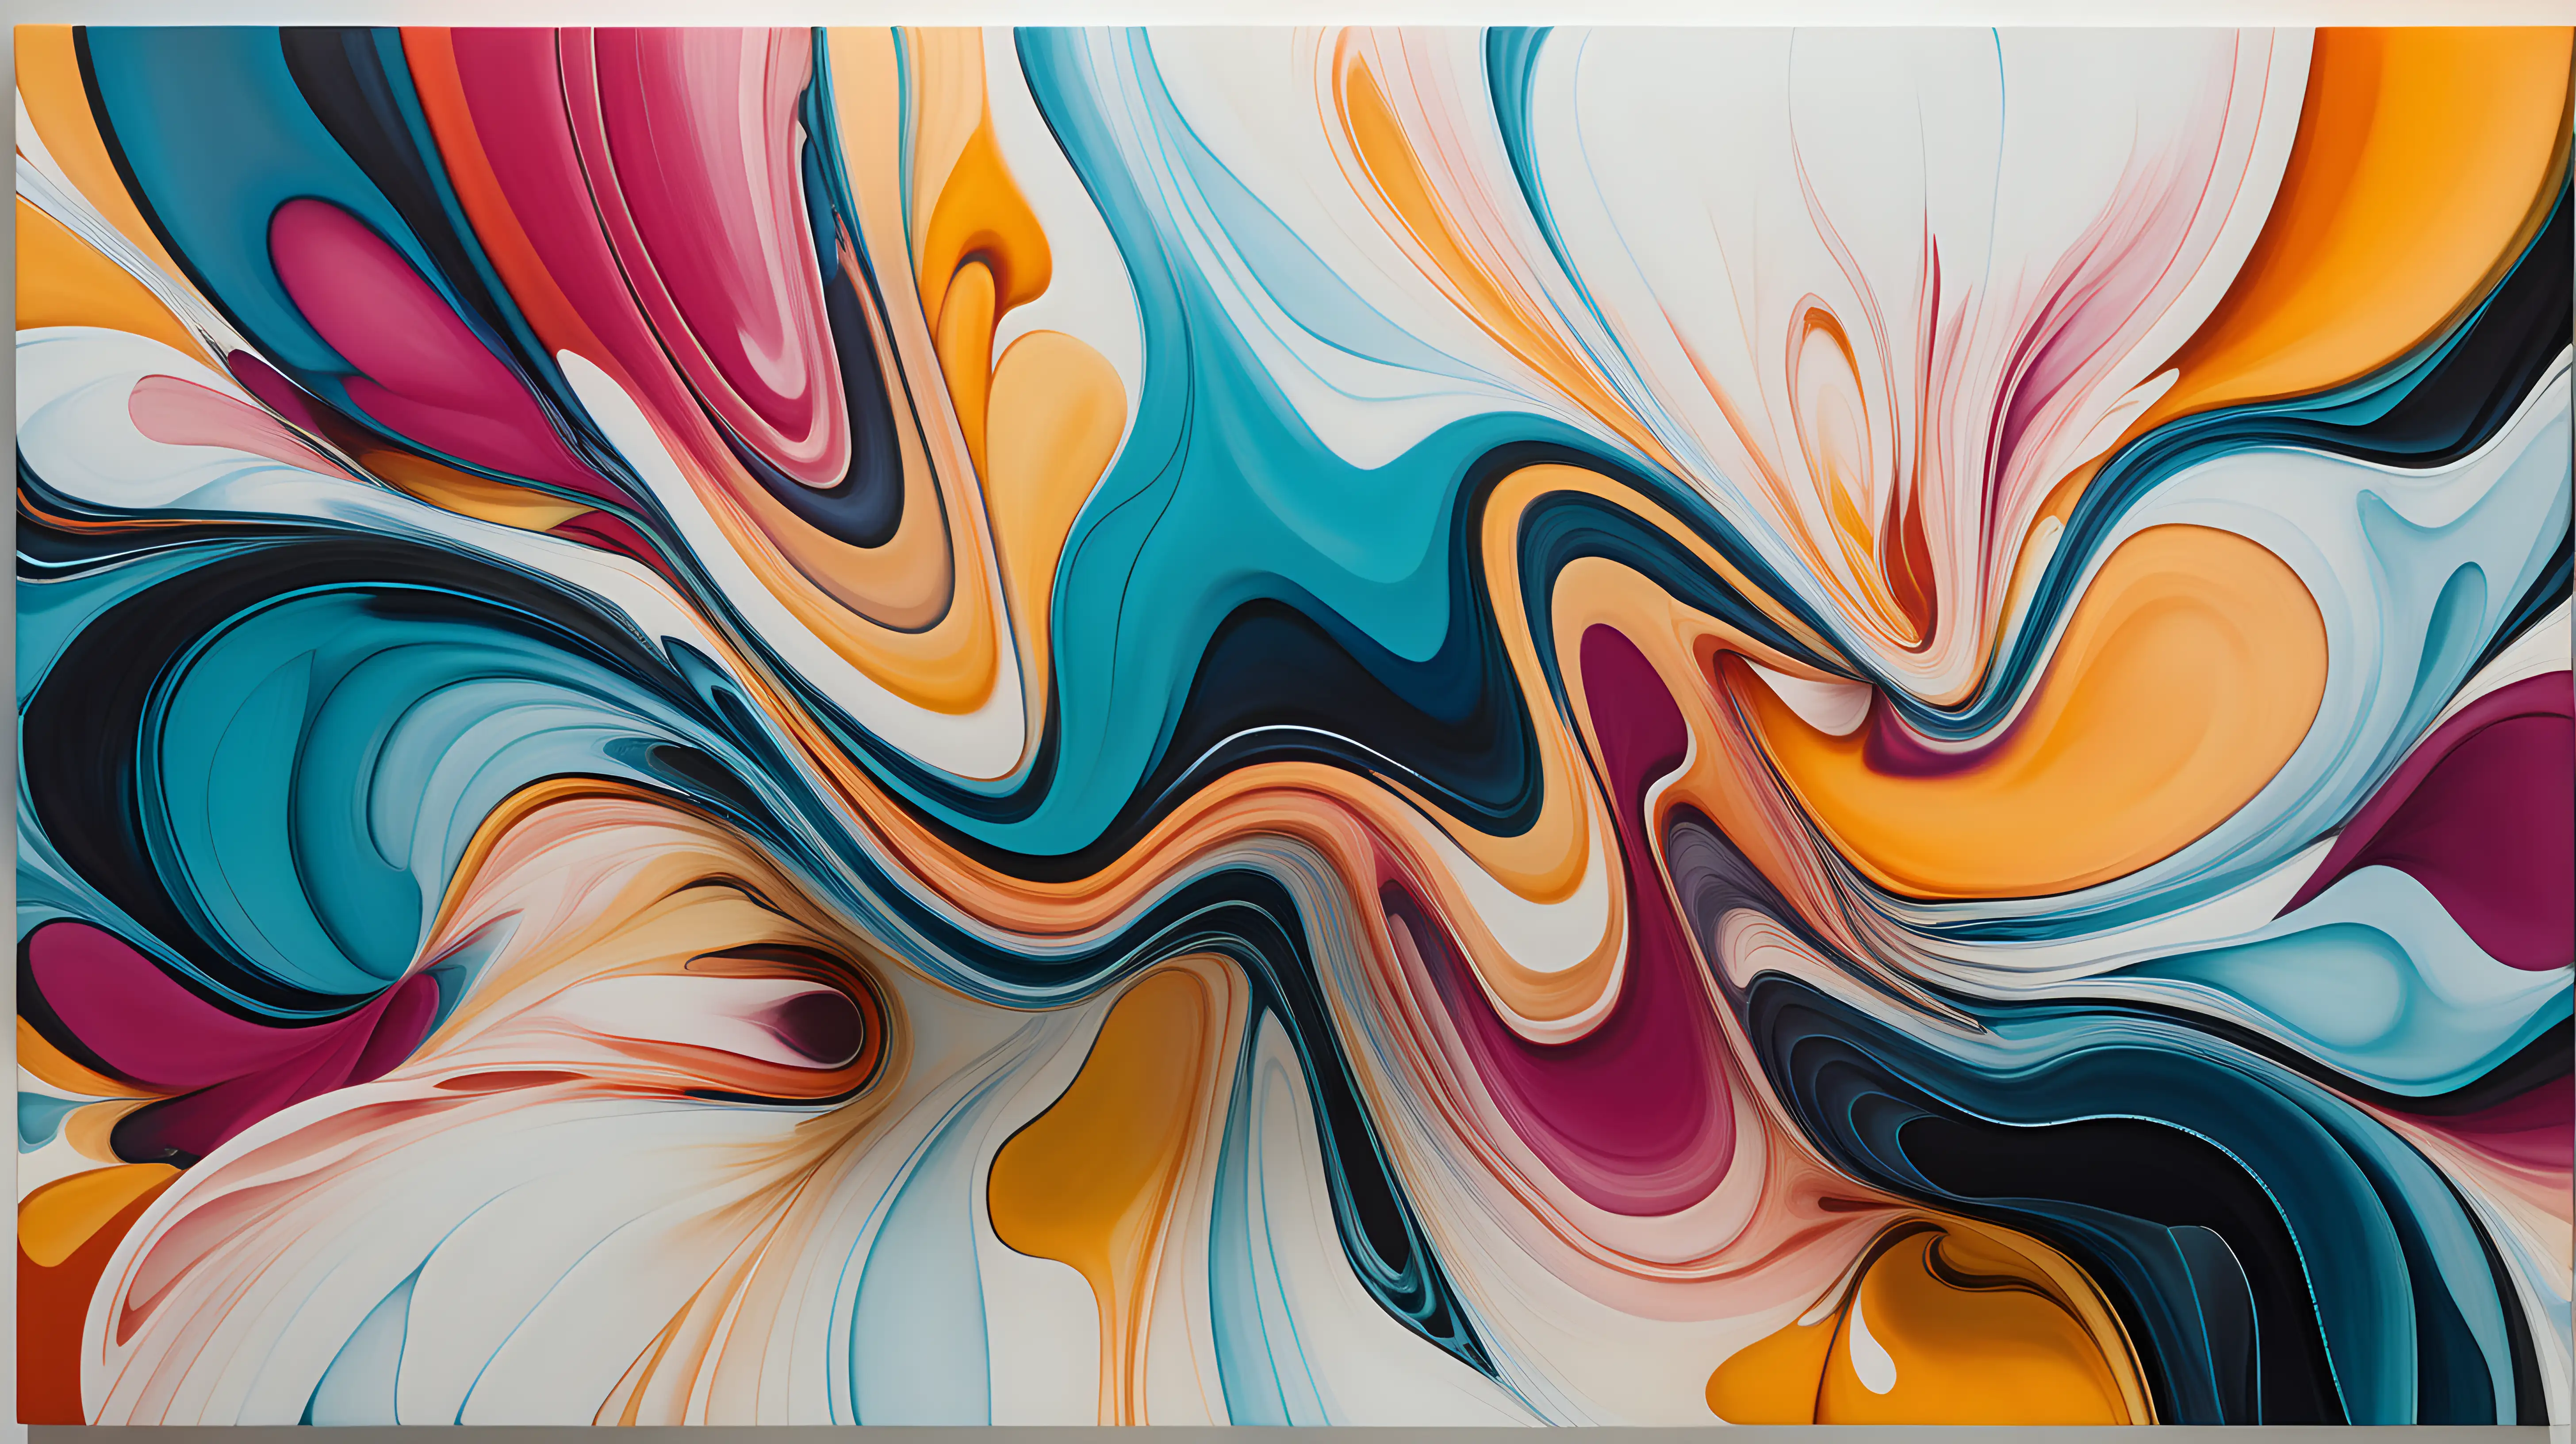 Dynamic Organic Forms Mural Abstract Masterpiece with Bold Strokes and Vibrant Hues